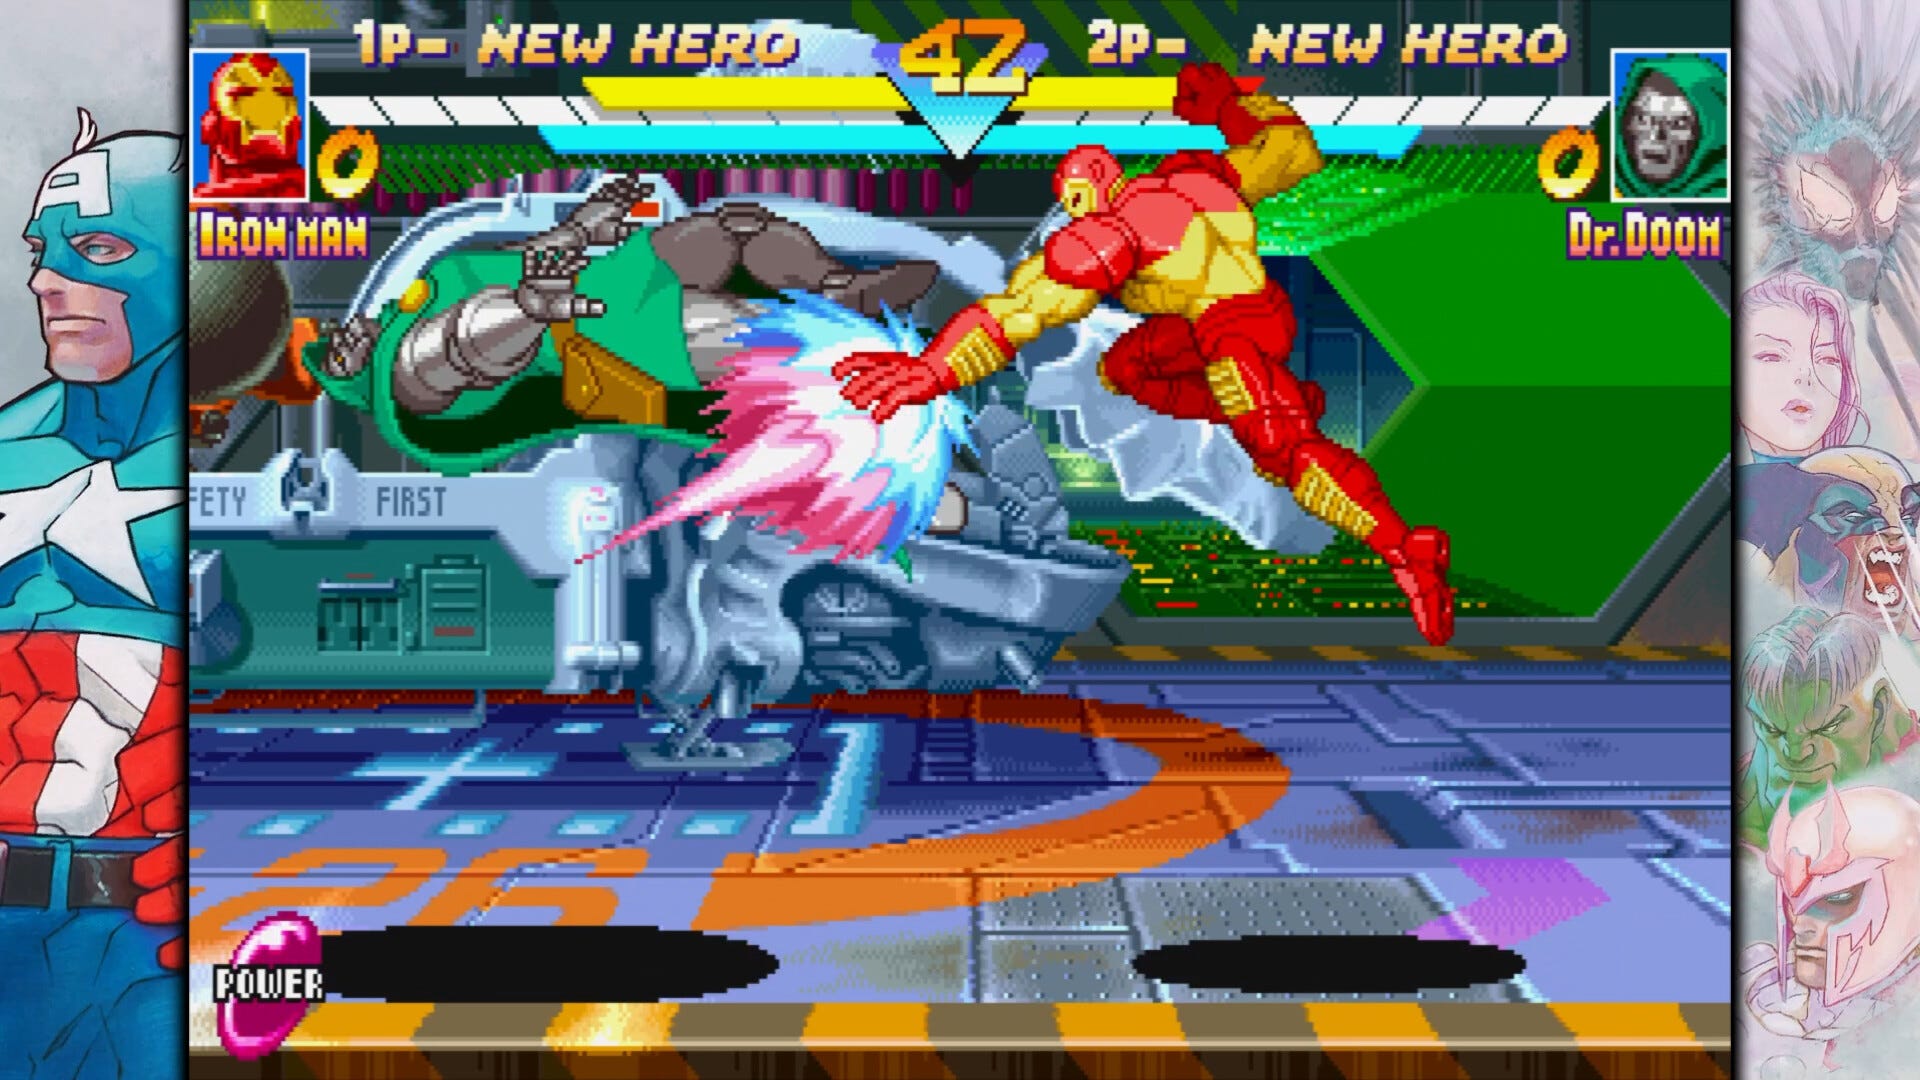 The Marvel vs Capcom Collection Introduces a Top-tier Fighting Game and Six Additional Arcade Classics to PC, Equipped with Rollback Netcode